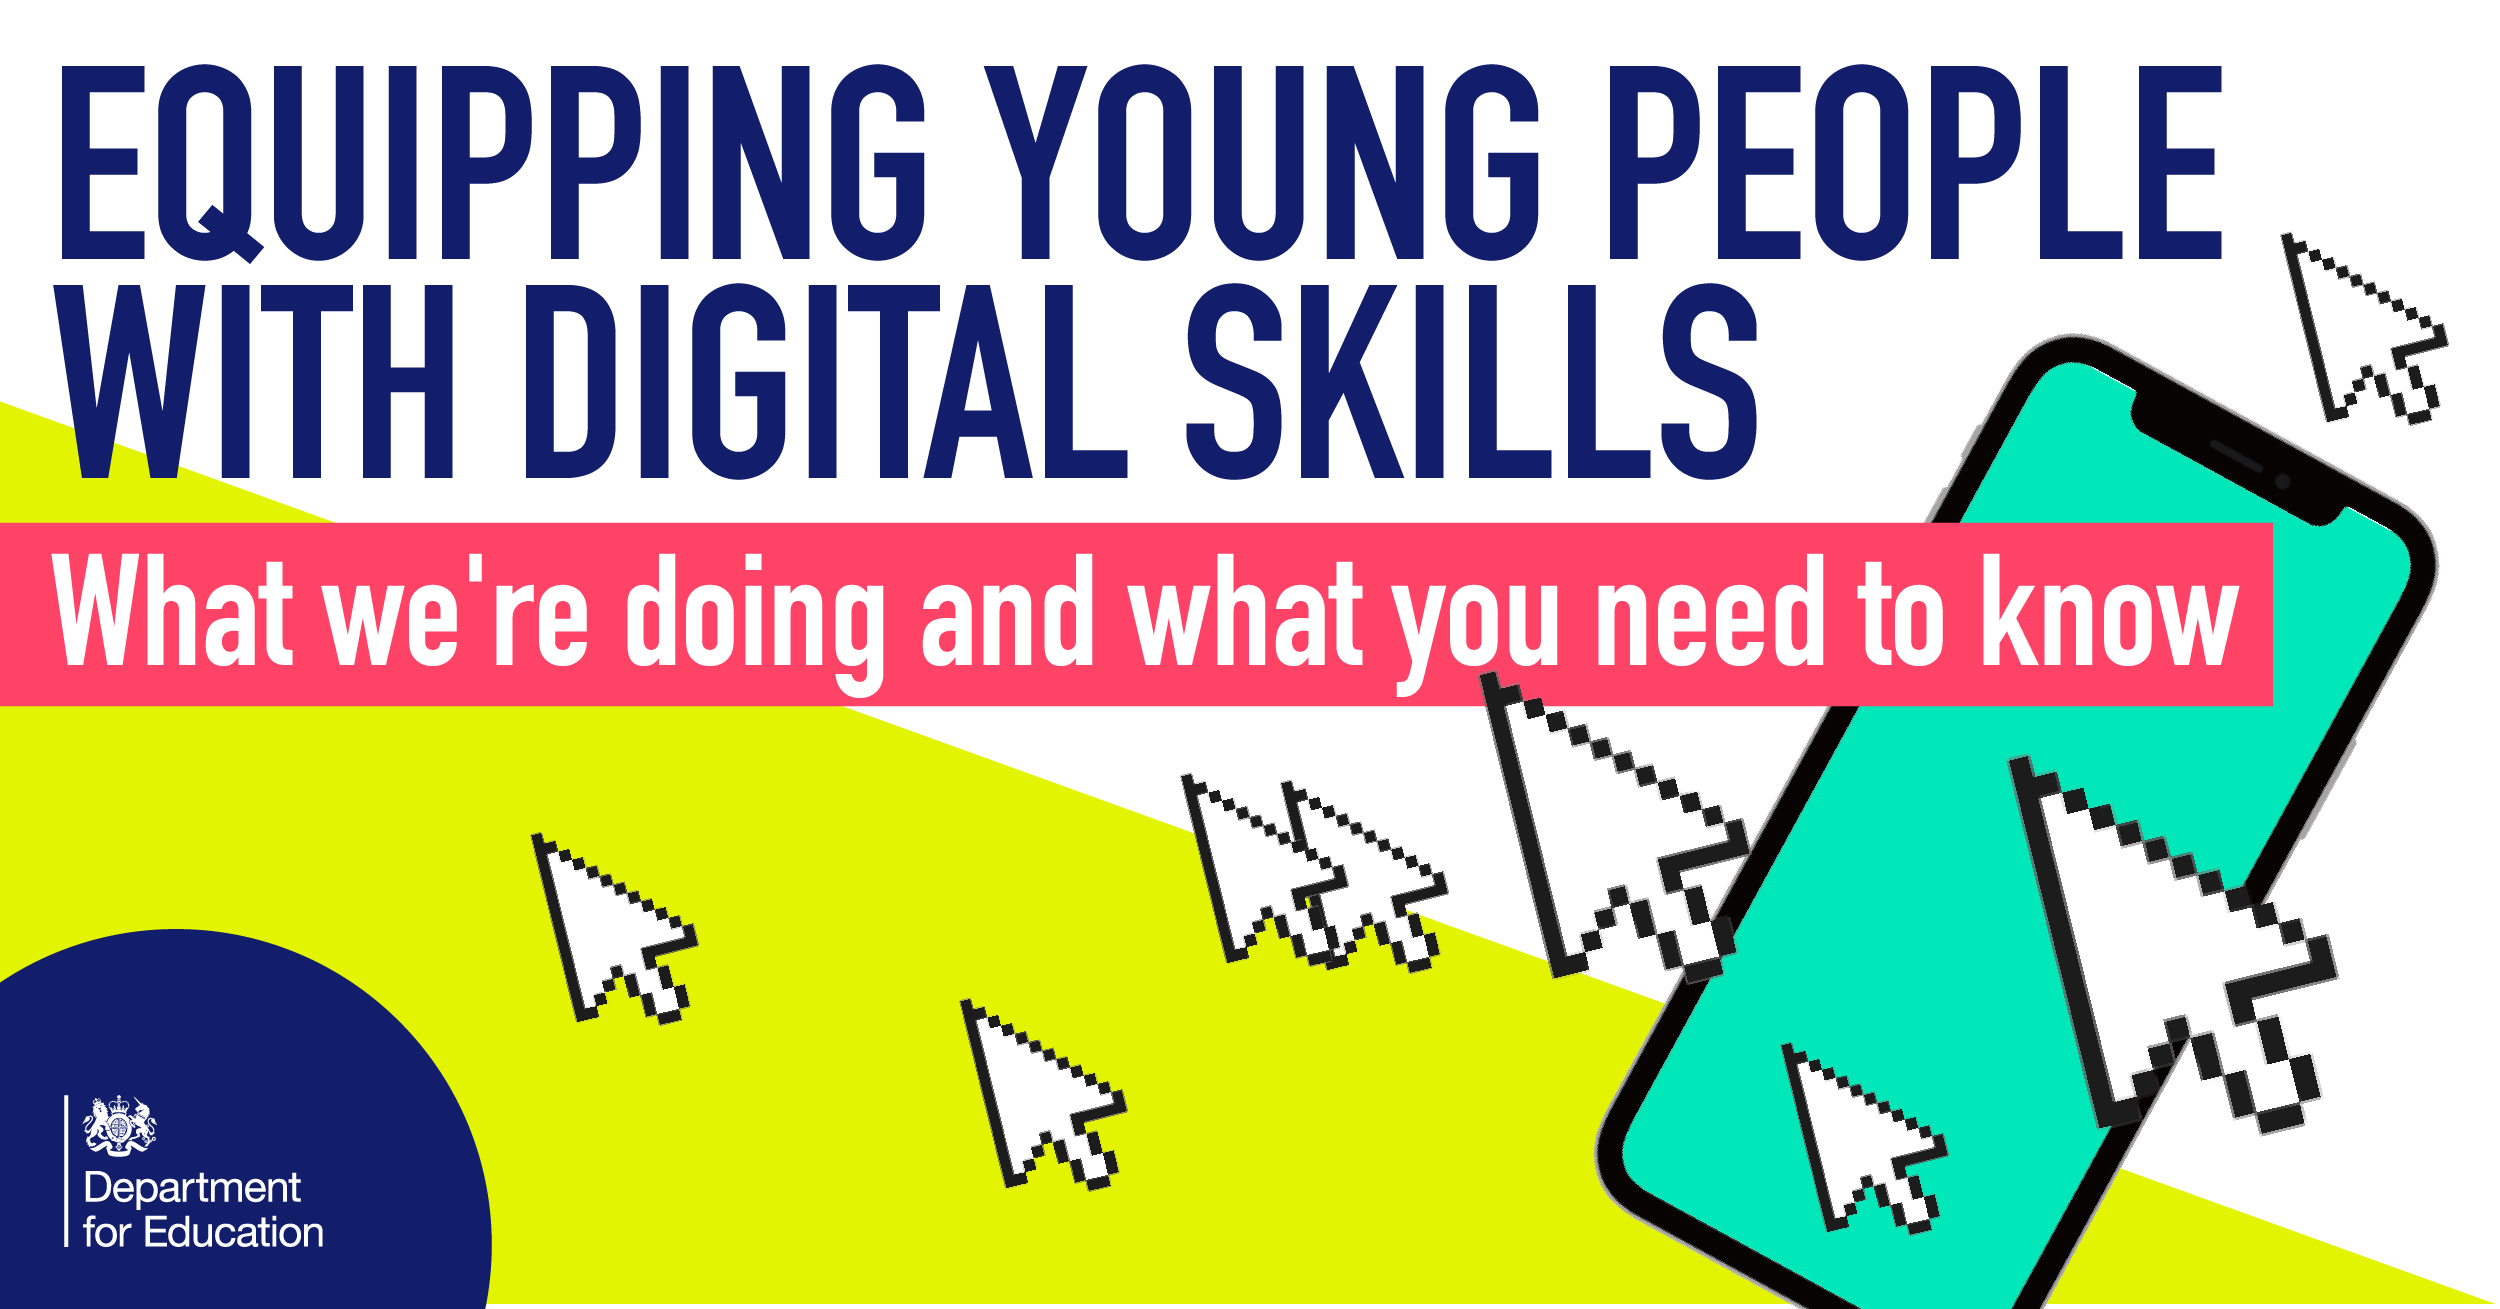 Equipping young people with digital skills what we're doing and what